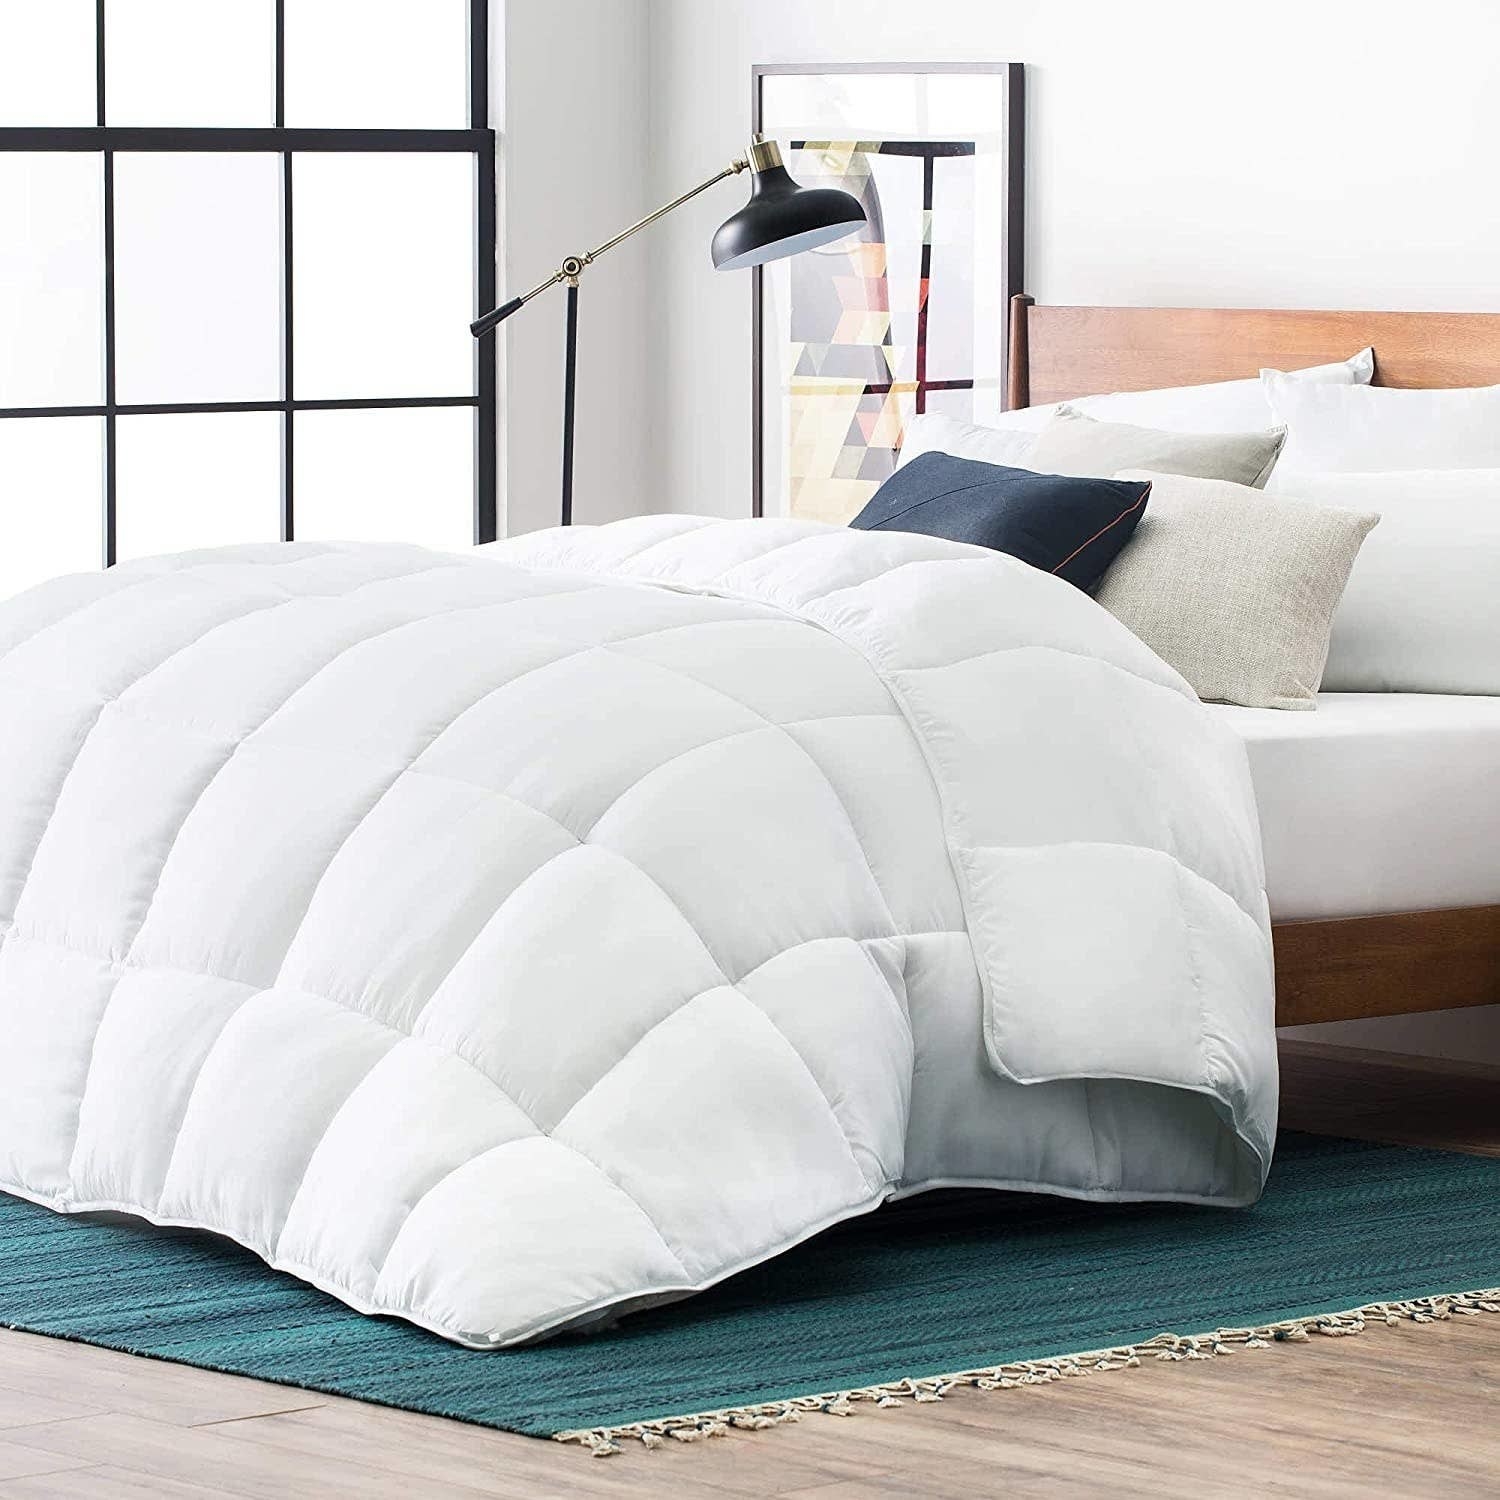 a comforter on a bed